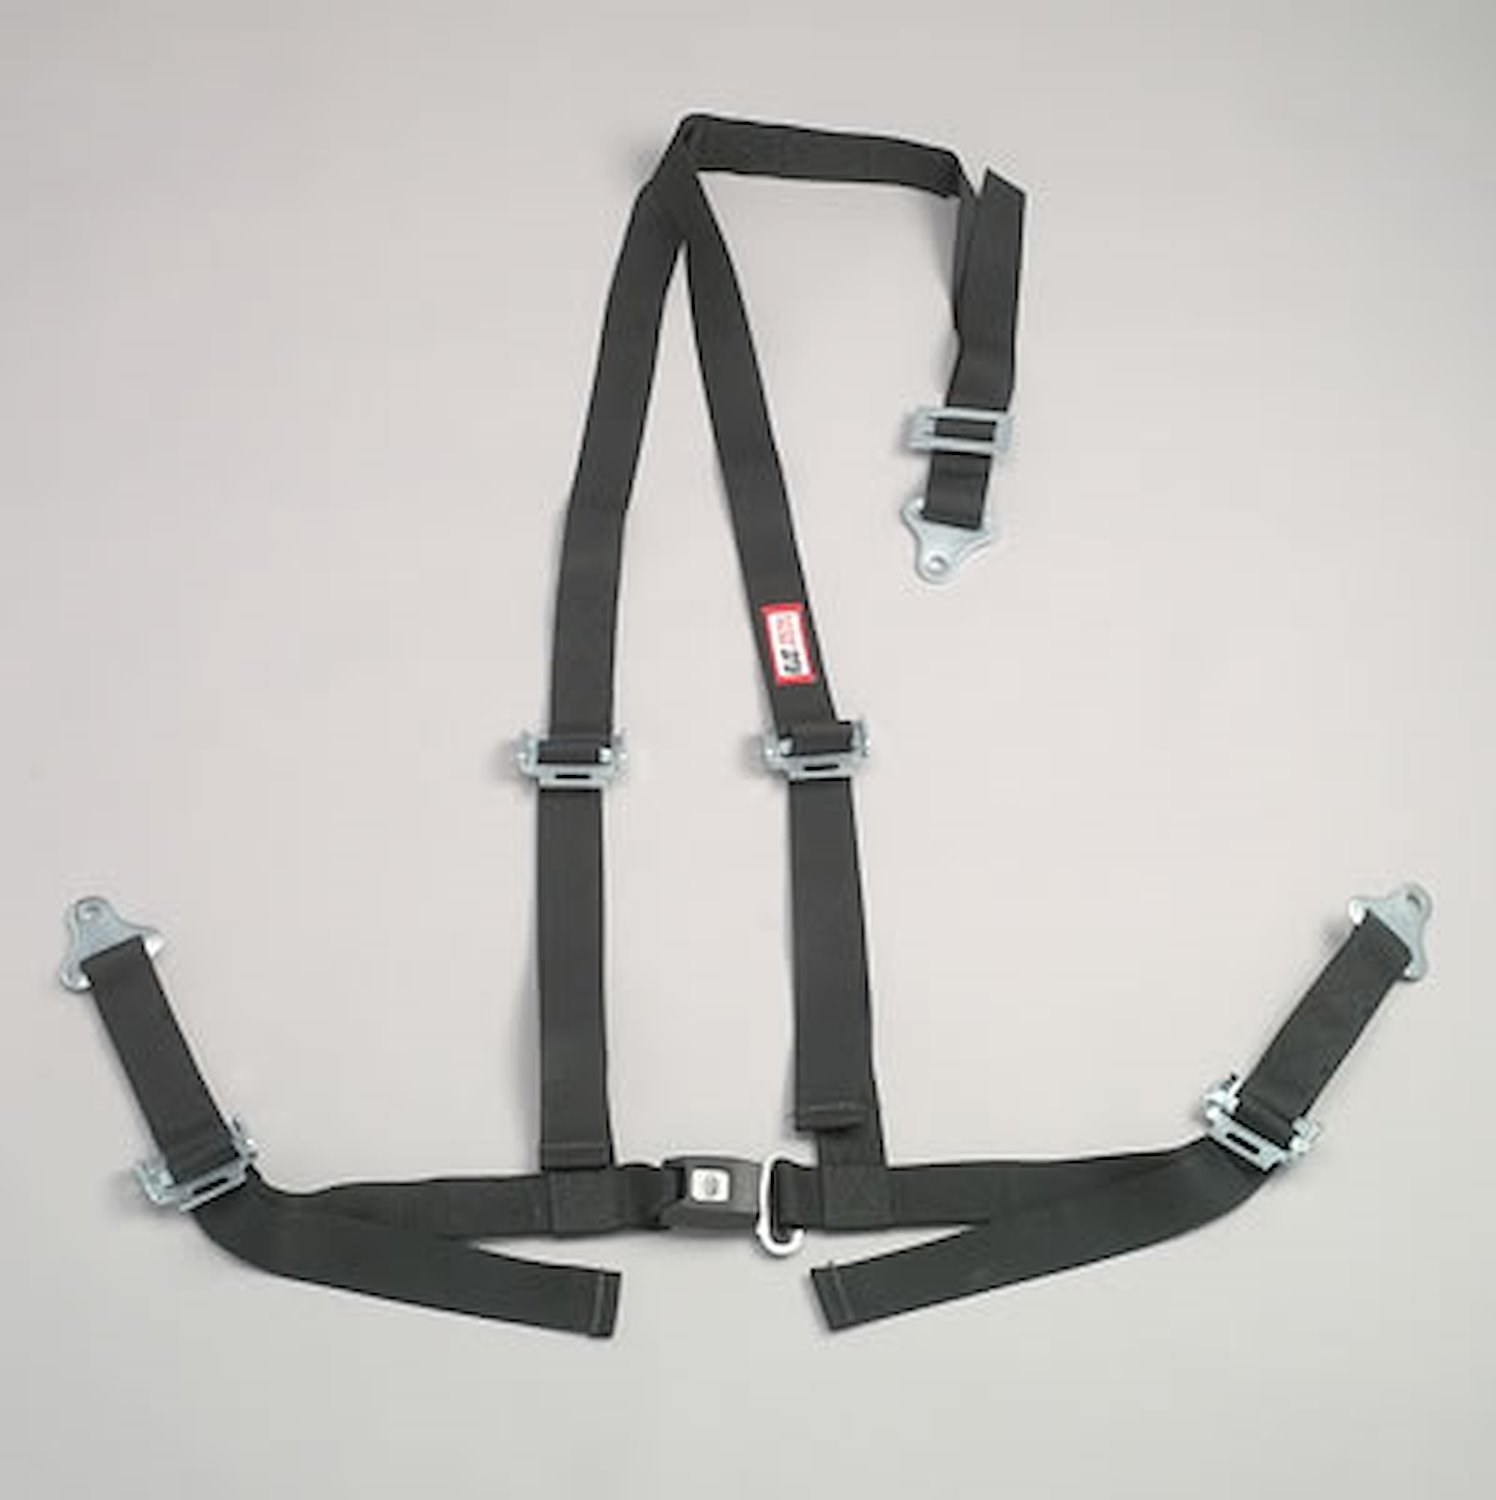 NON-SFI B&T HARNESS 2 PULL UP Lap Belt SNAP 2 S. H. Individual ROLL BAR Mount WRAP/SNAP w/STERNUM STRAP YELLOW